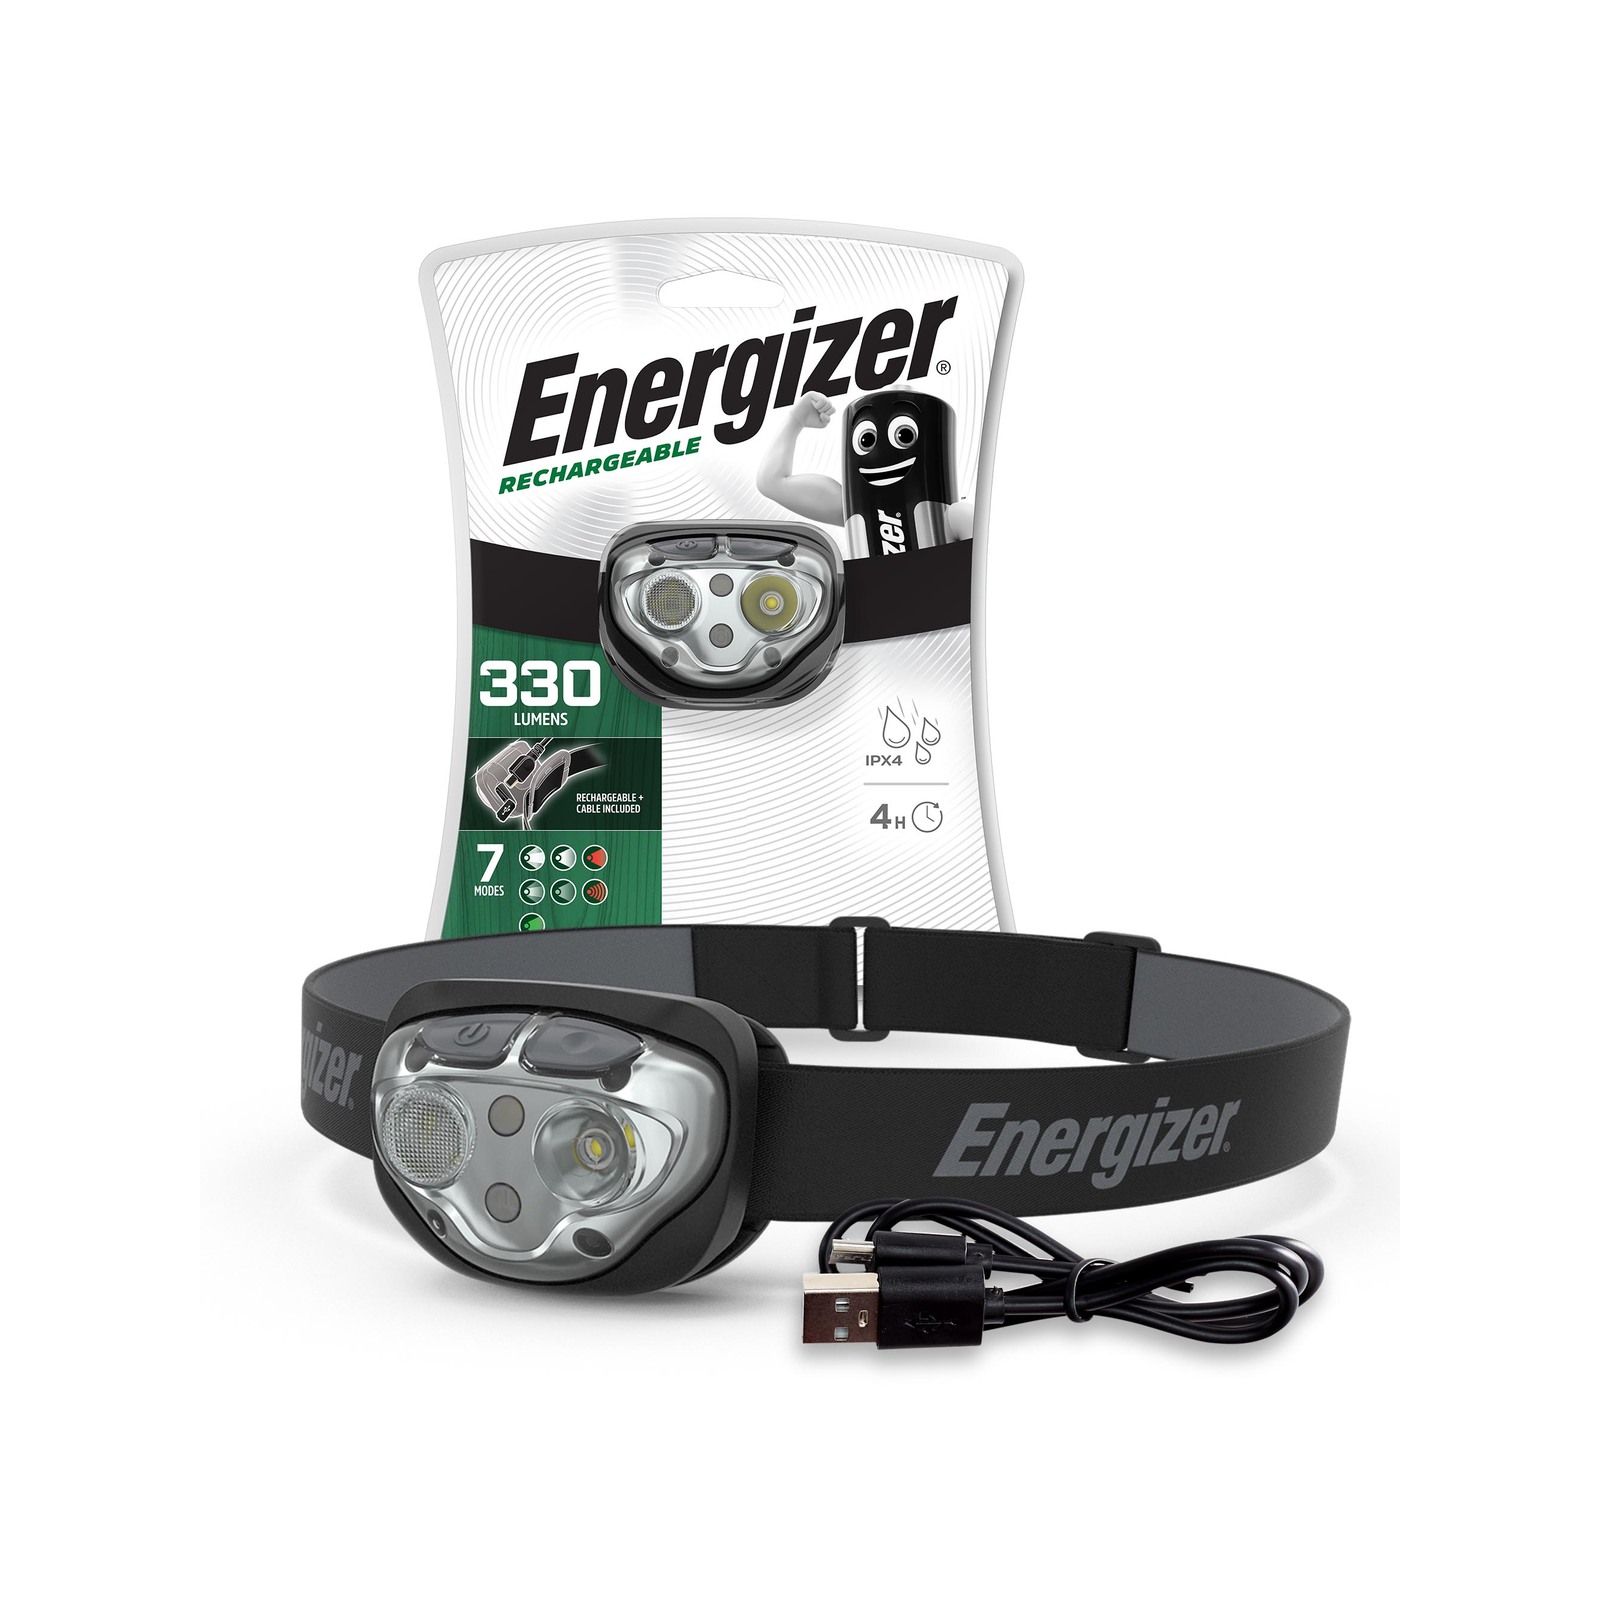 Energizer Vision Ultra HD 330lm Rechargeable Headlight Bunnings Australia